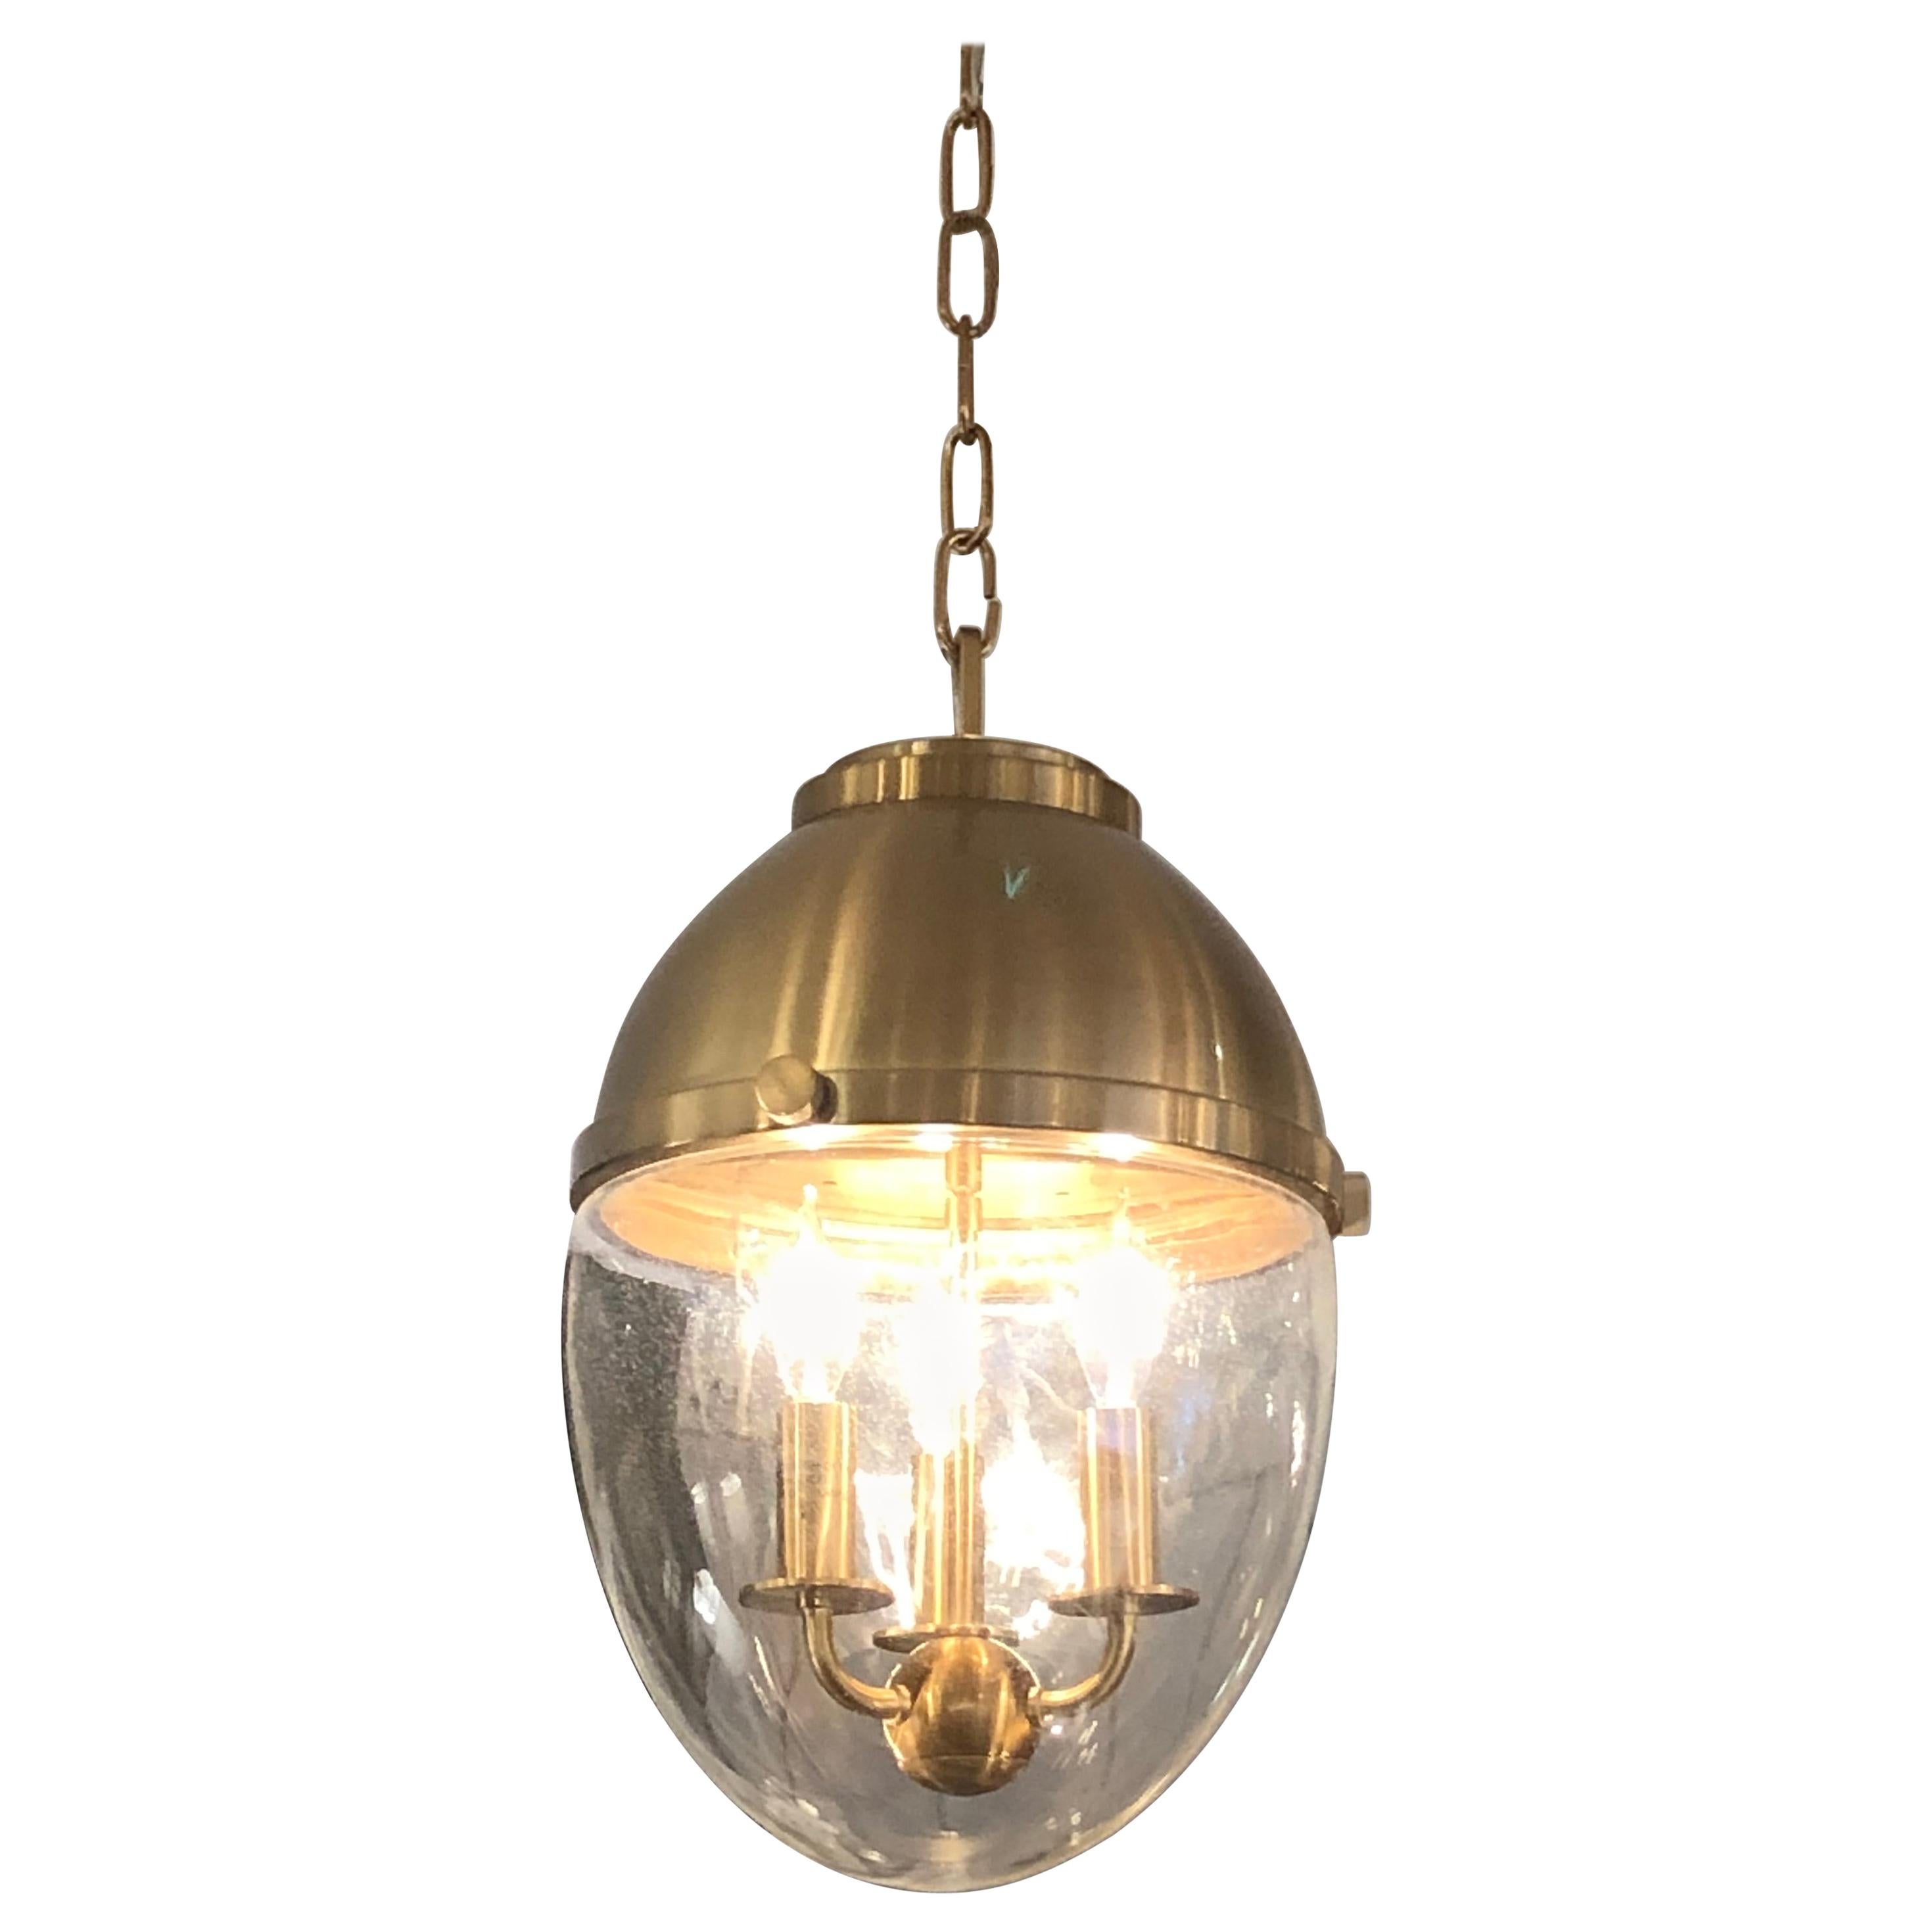 Stylish Brass and Glass Egg Shaped Pendant Chandelier